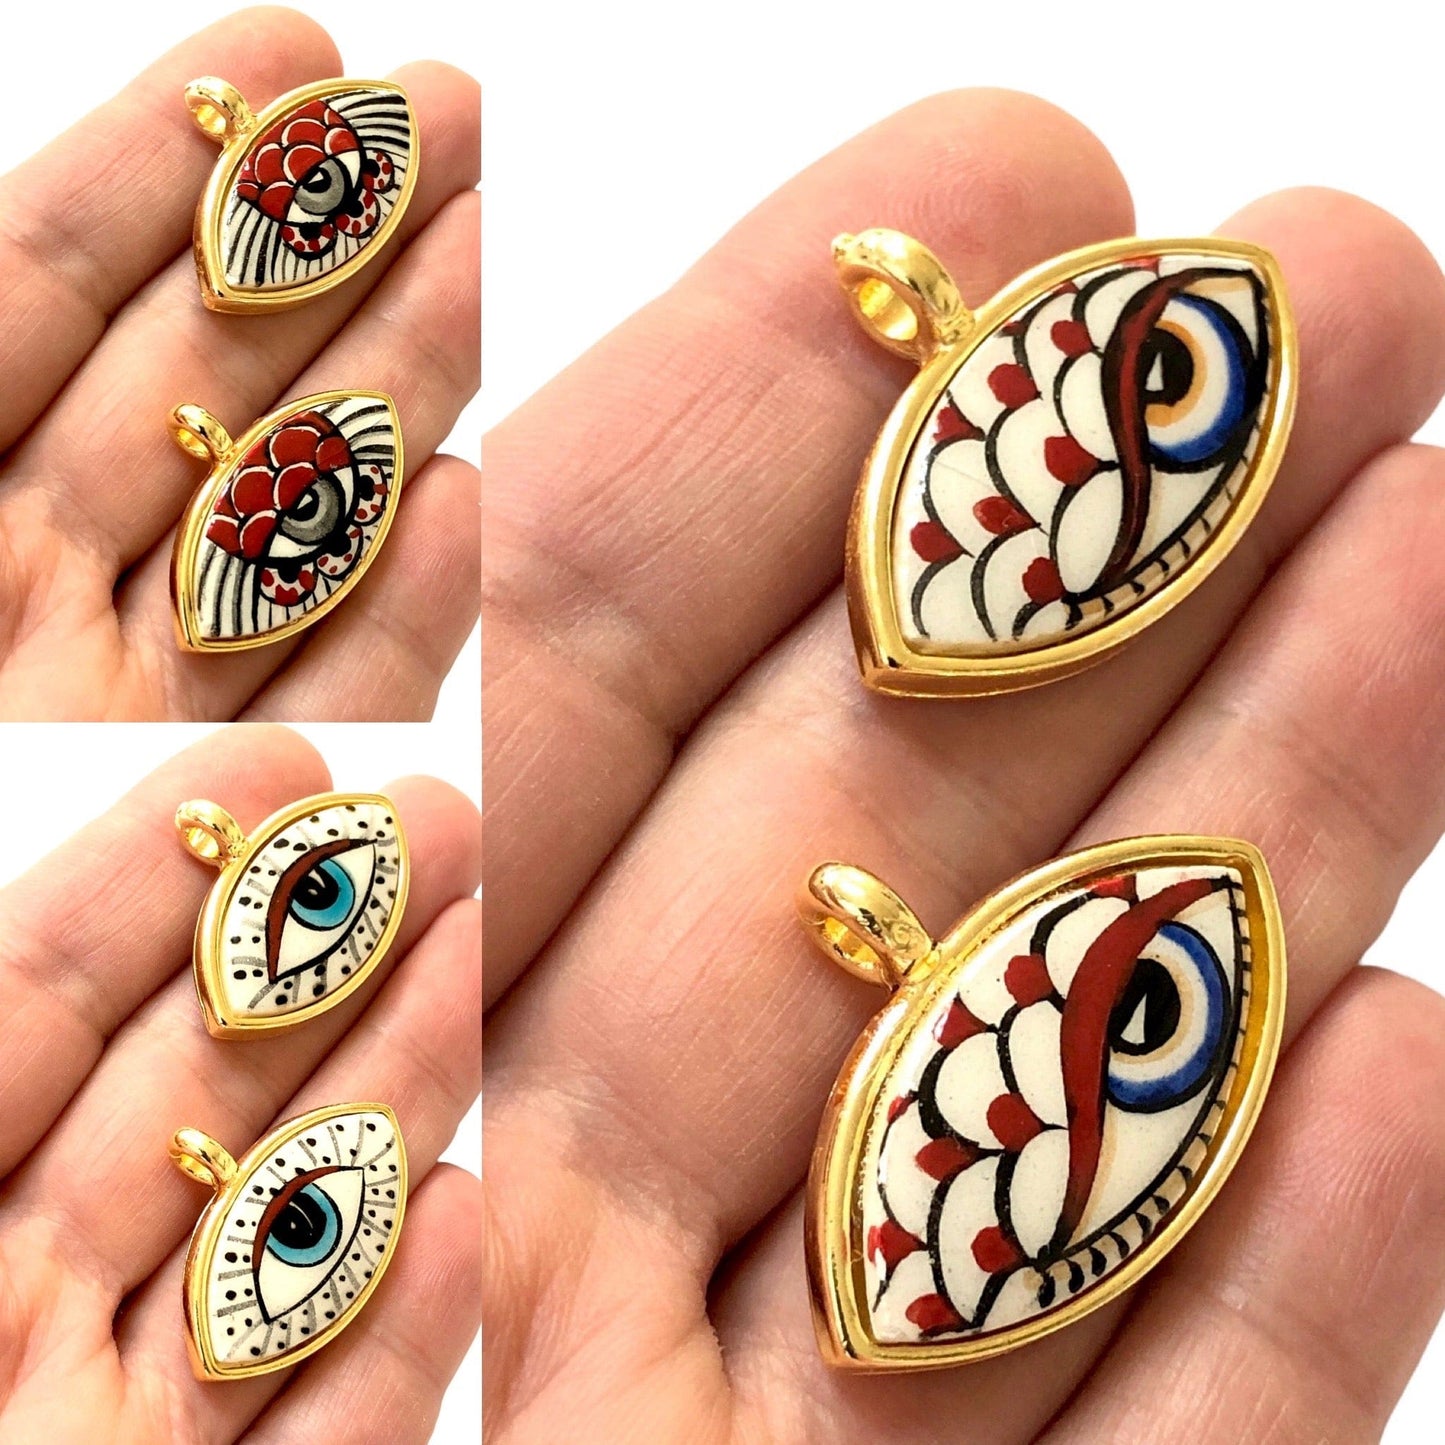 Large Gold Plated Framed Hand Painted Ceramic Eye Pendant-001